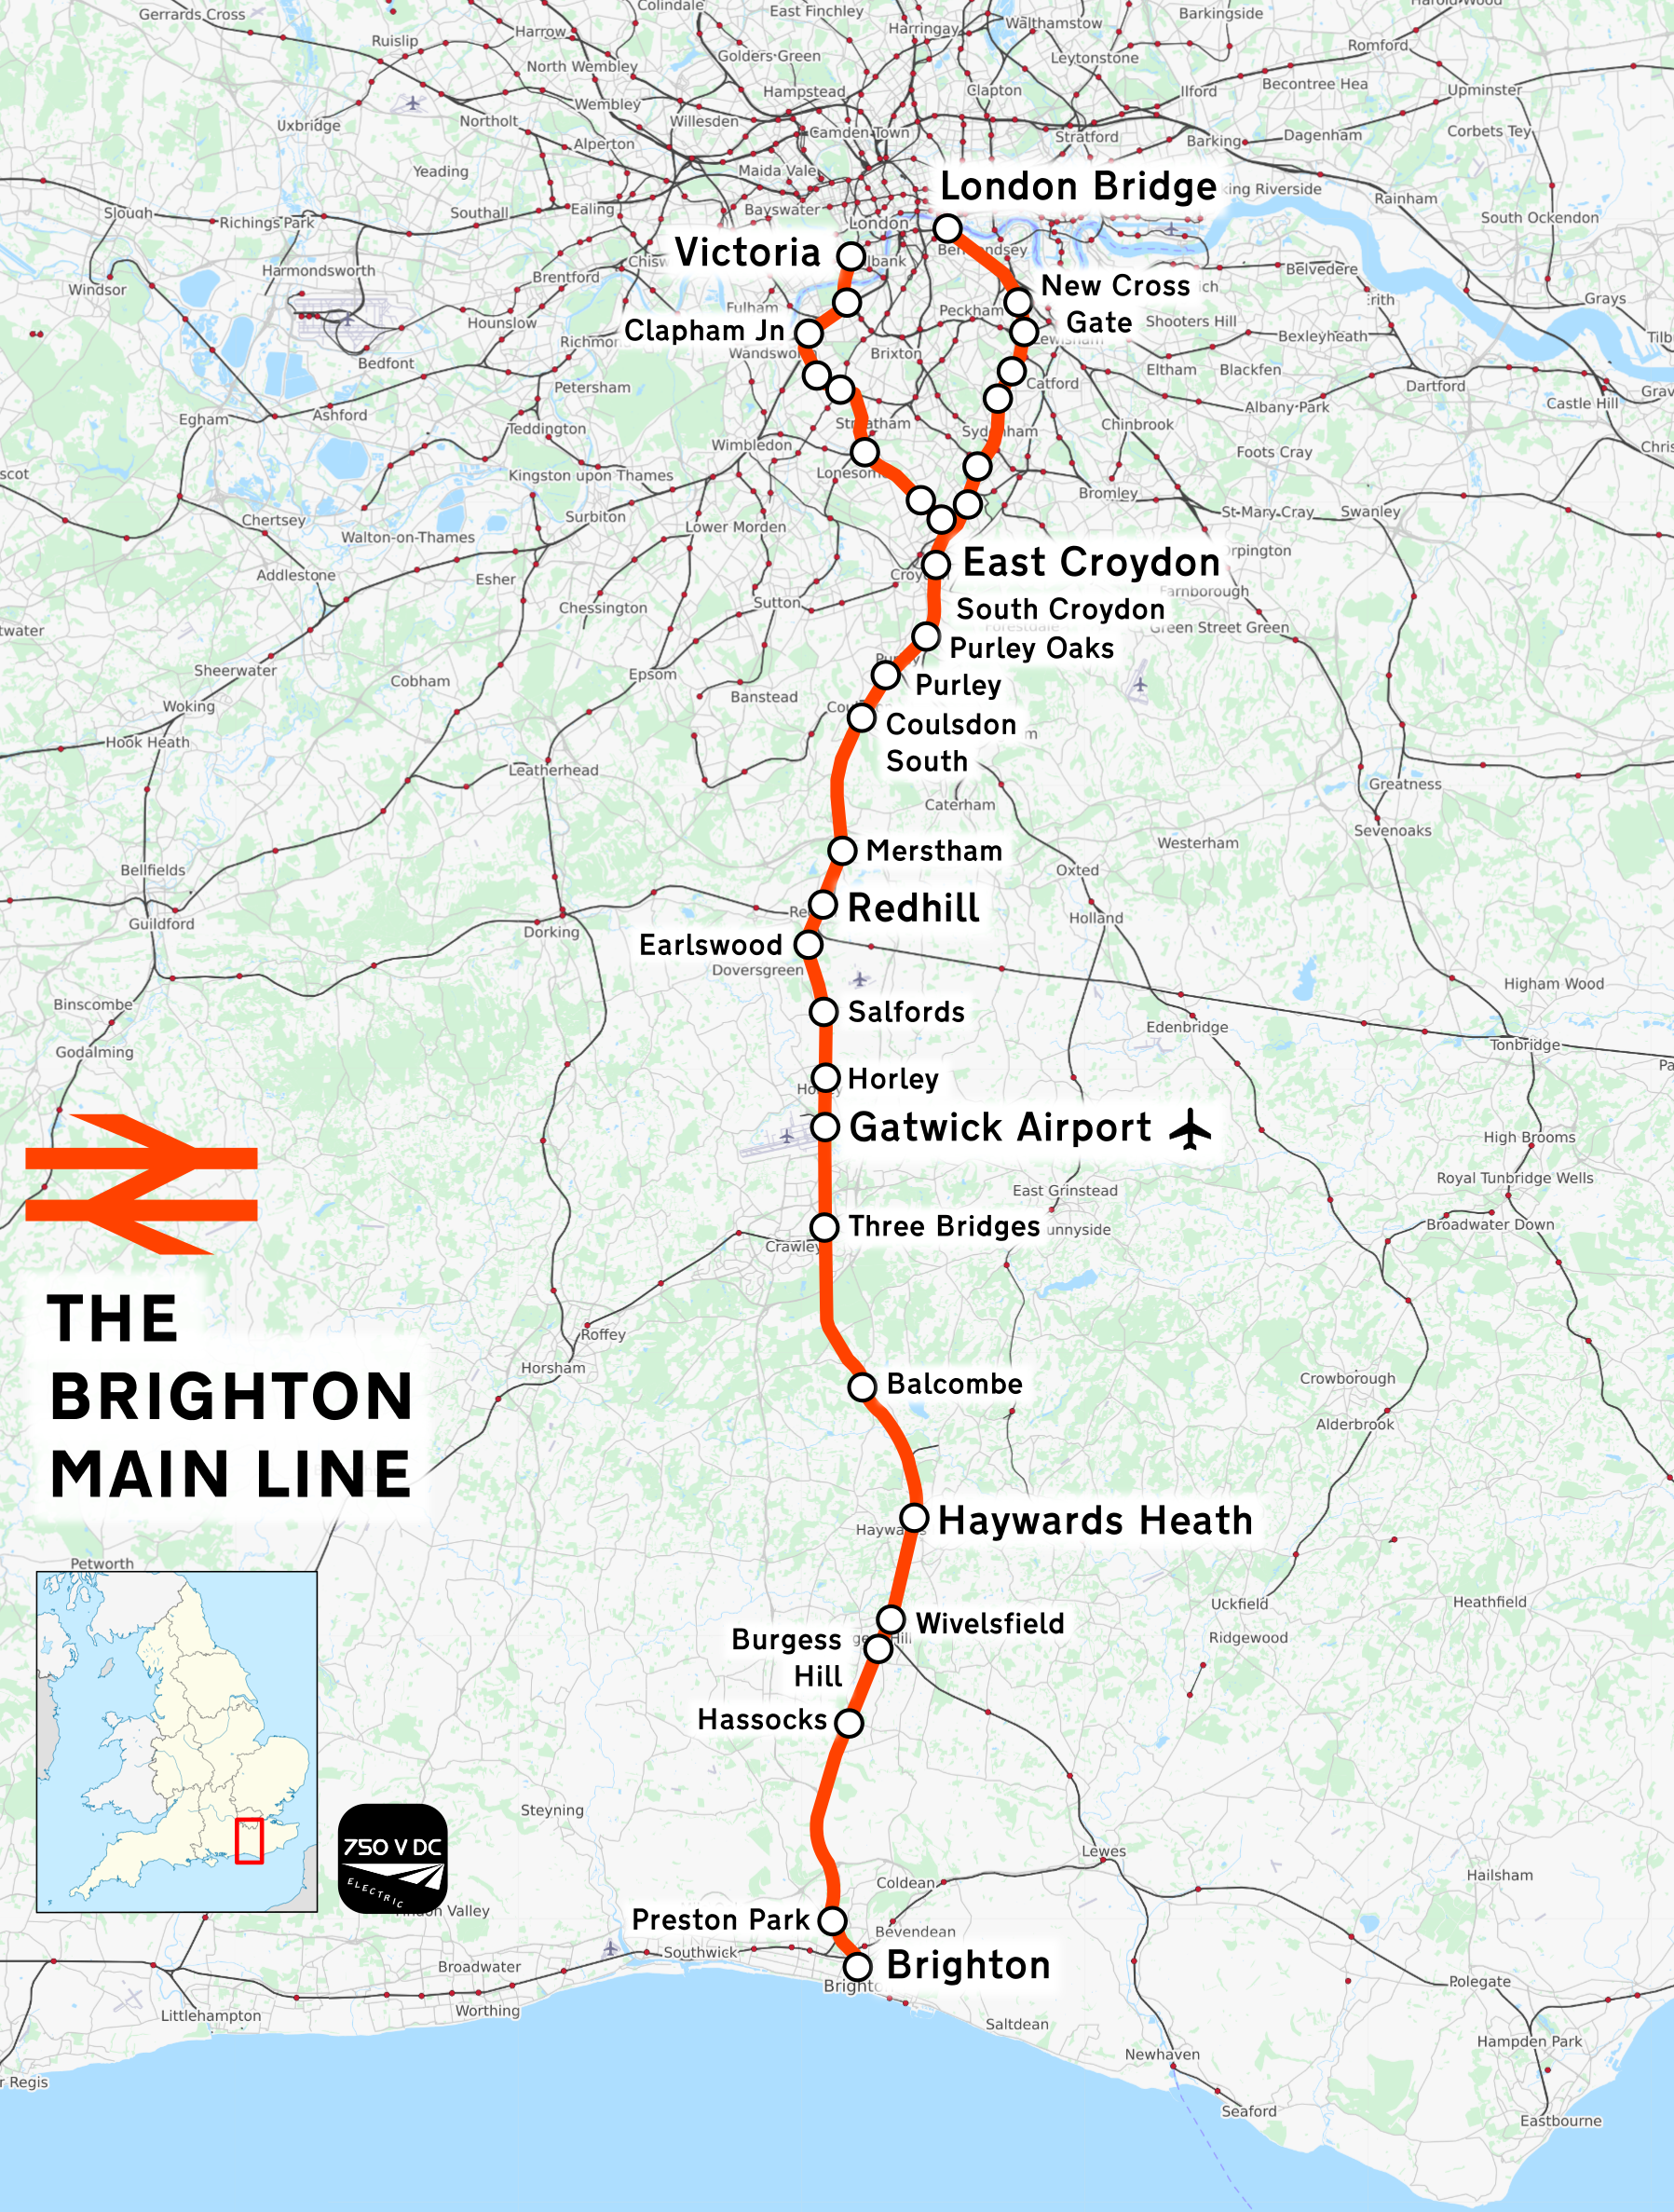 The London to Brighton Main Line is a major railway line in the United Kingdom that links Brighton, on the south coast of England, with central London. In London the line has two branches, out of London Victoria and London Bridge stations respectively, which join up in Croydon and continue towards Brighton as one line.